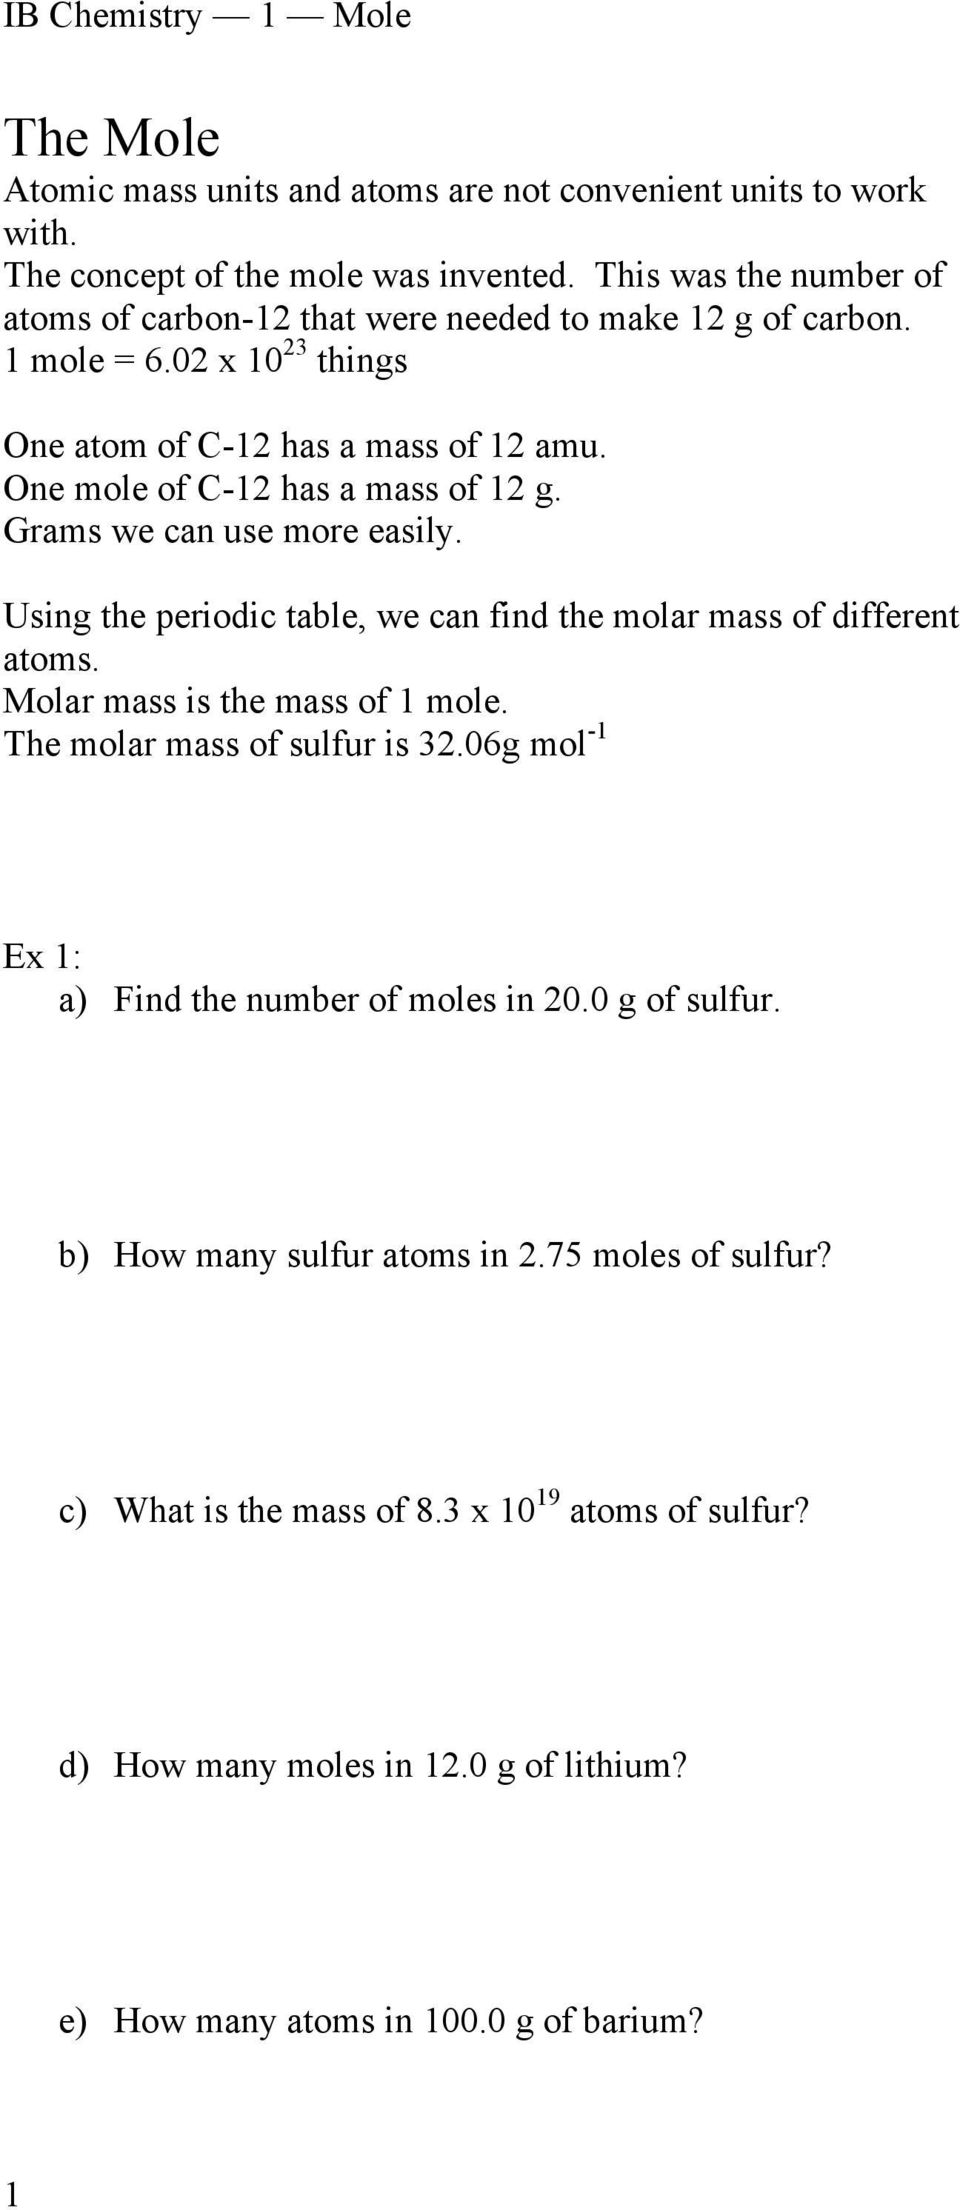 One mole of C-12 has a mass of 12 g. Grams we can use more easily. Using the periodic table, we can find the molar mass of different atoms. Molar mass is the mass of 1 mole.